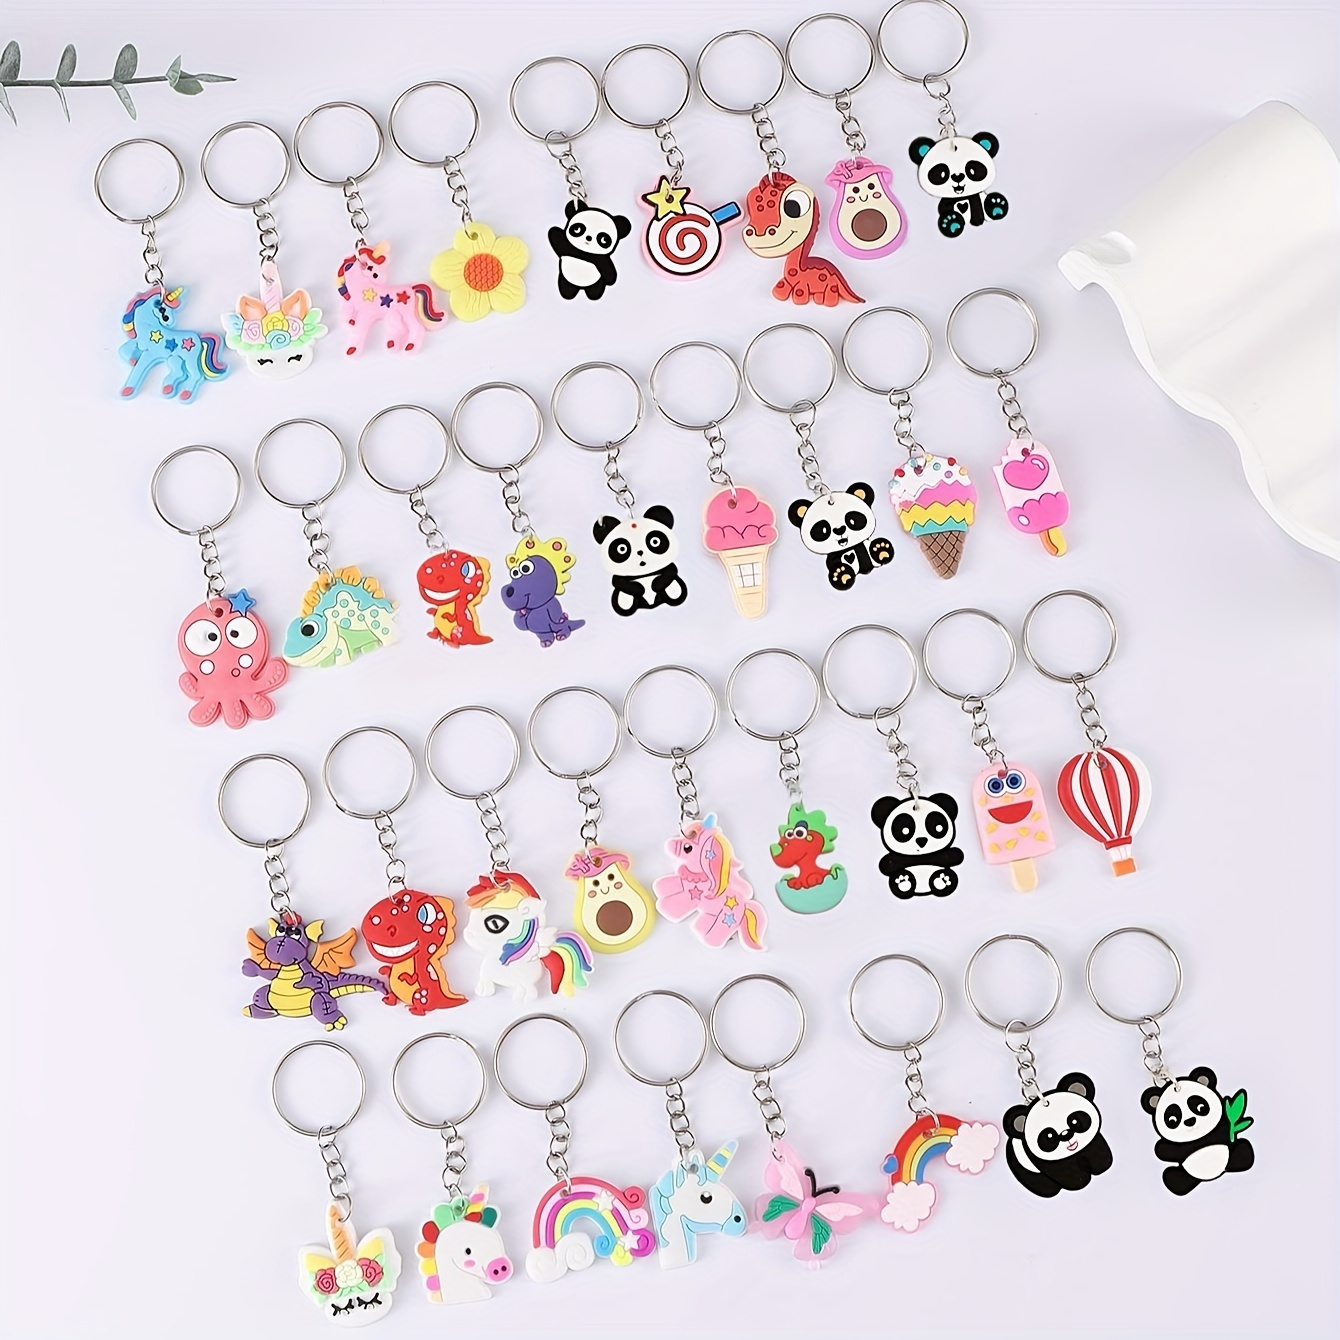 

100-piece Cute Cartoon Keychain Set - Panda, Rainbow & Avocado Charms For Bags And Keys - Durable Pvc/silicone, Perfect Gift For Women